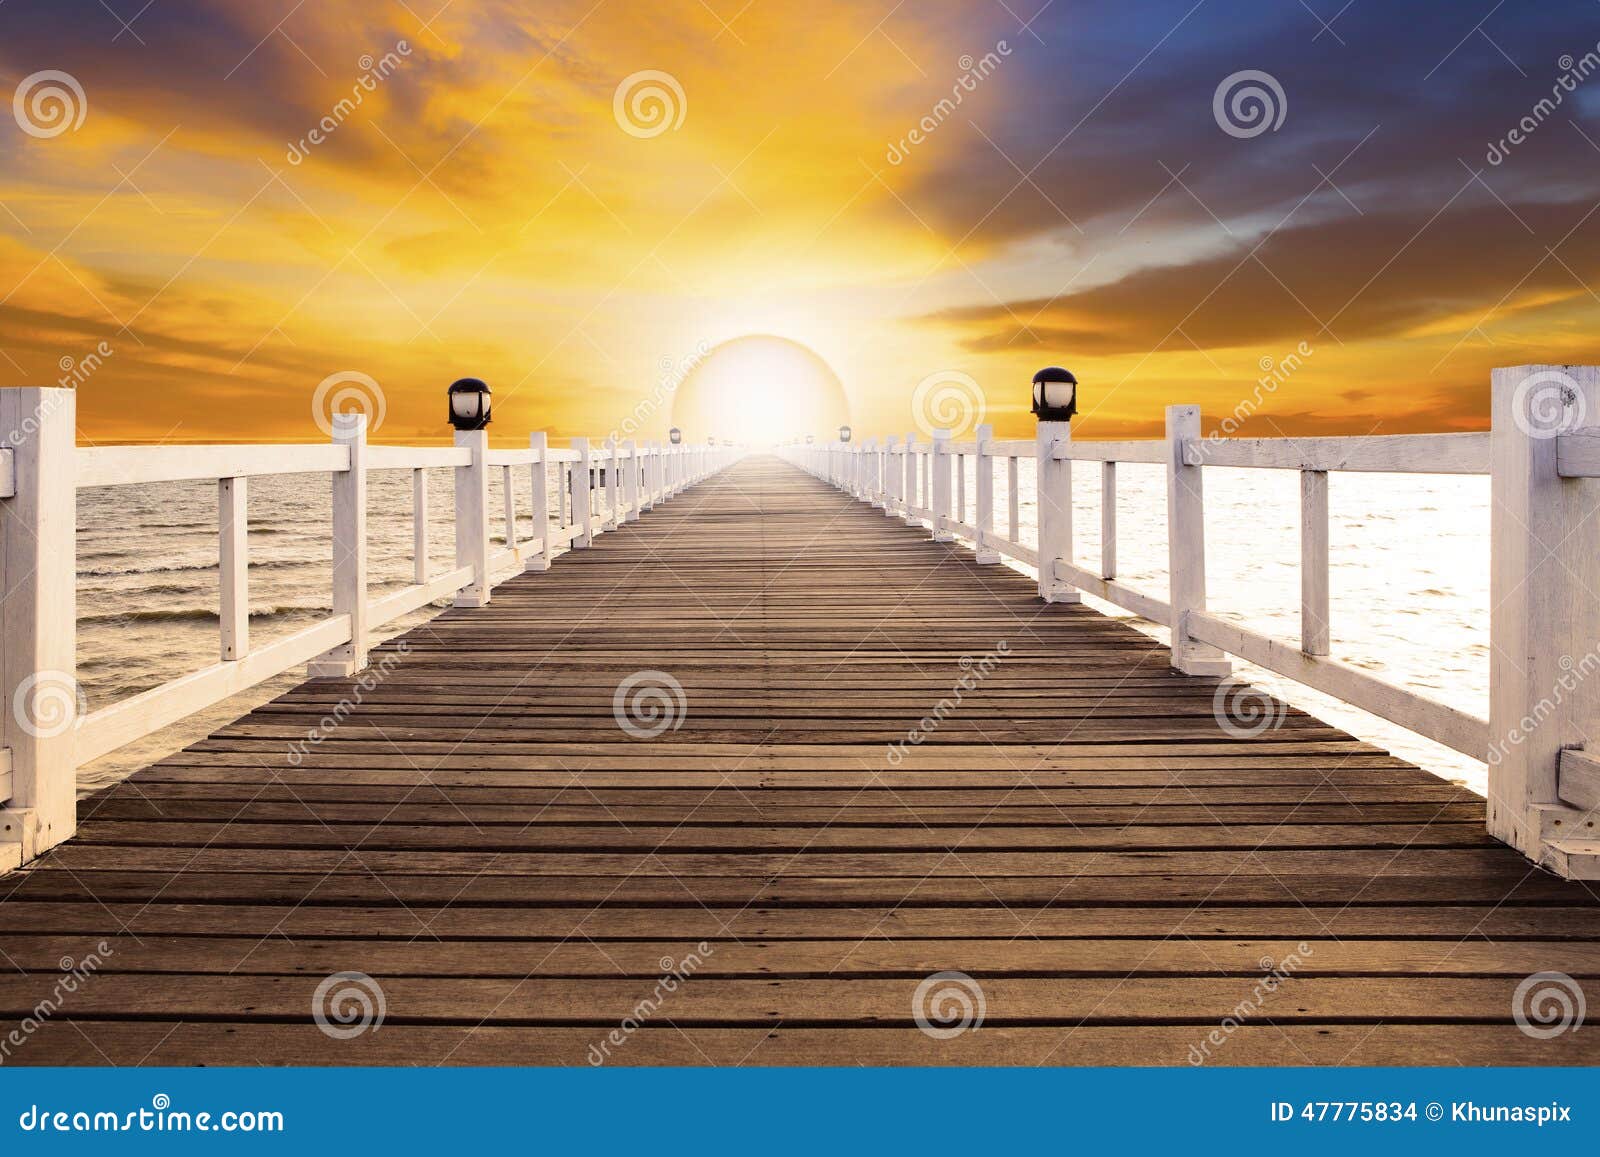 sun set scene and old wood bridge pier with nobody against beaut